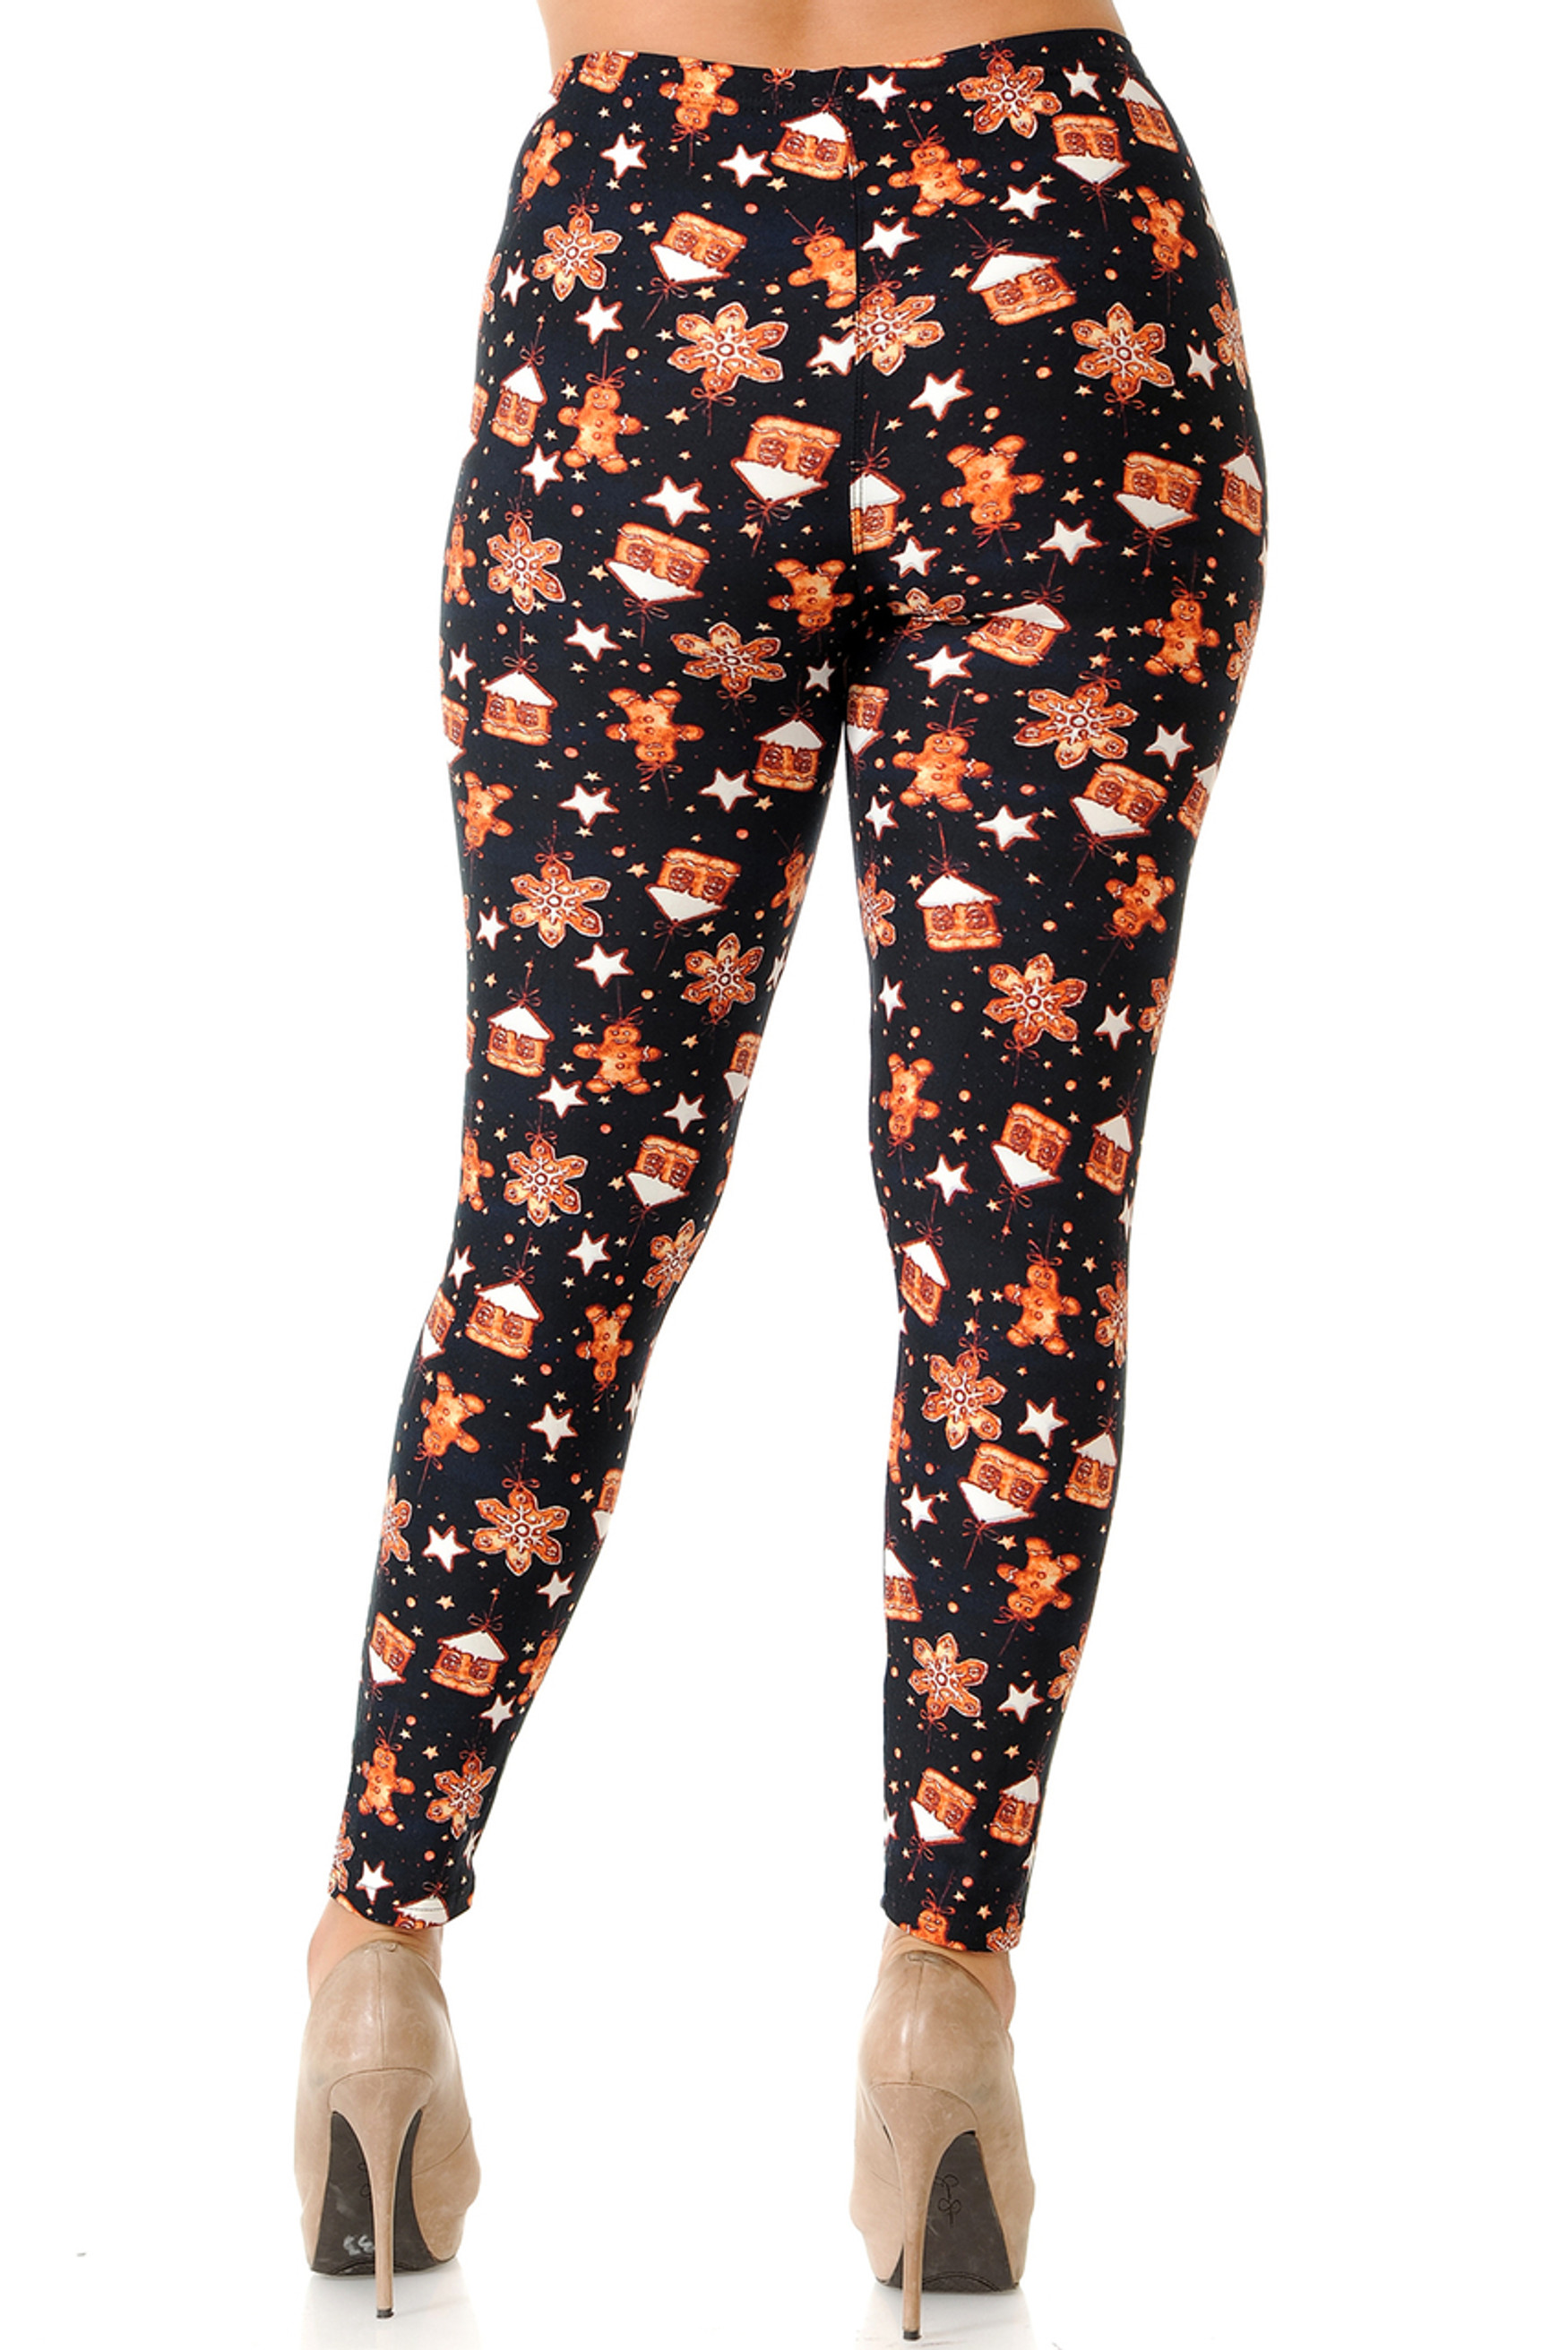 Buttery Soft Holiday Gingerbread Christmas Plus Size Leggings